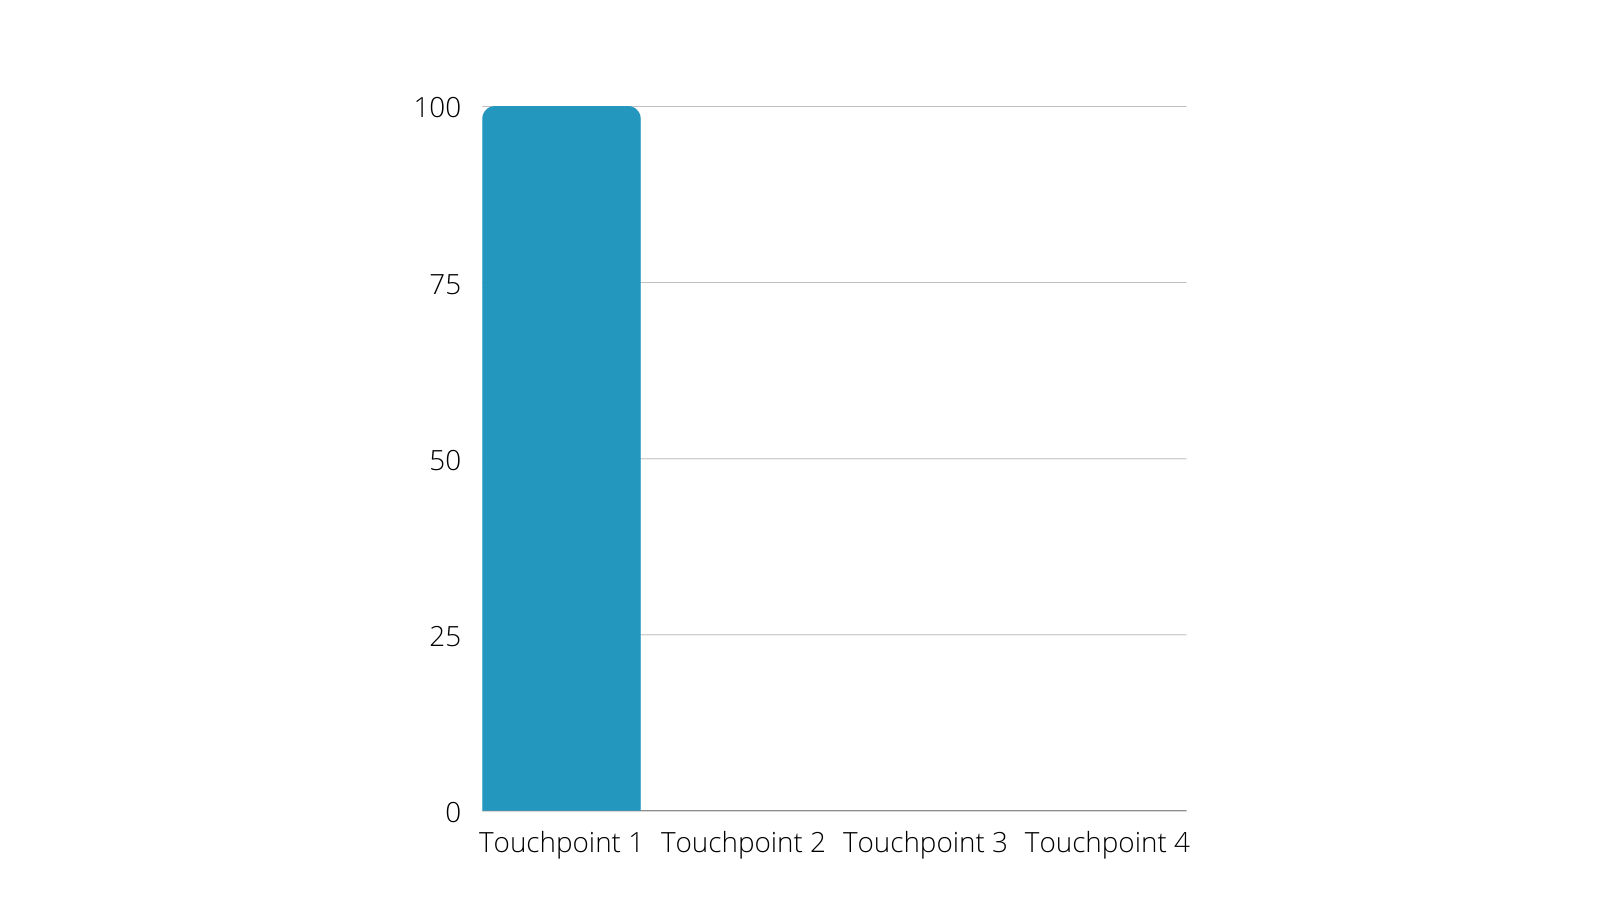 A bar graph with touchpoint 1 at 100 and touchpoints 2-4 at 0